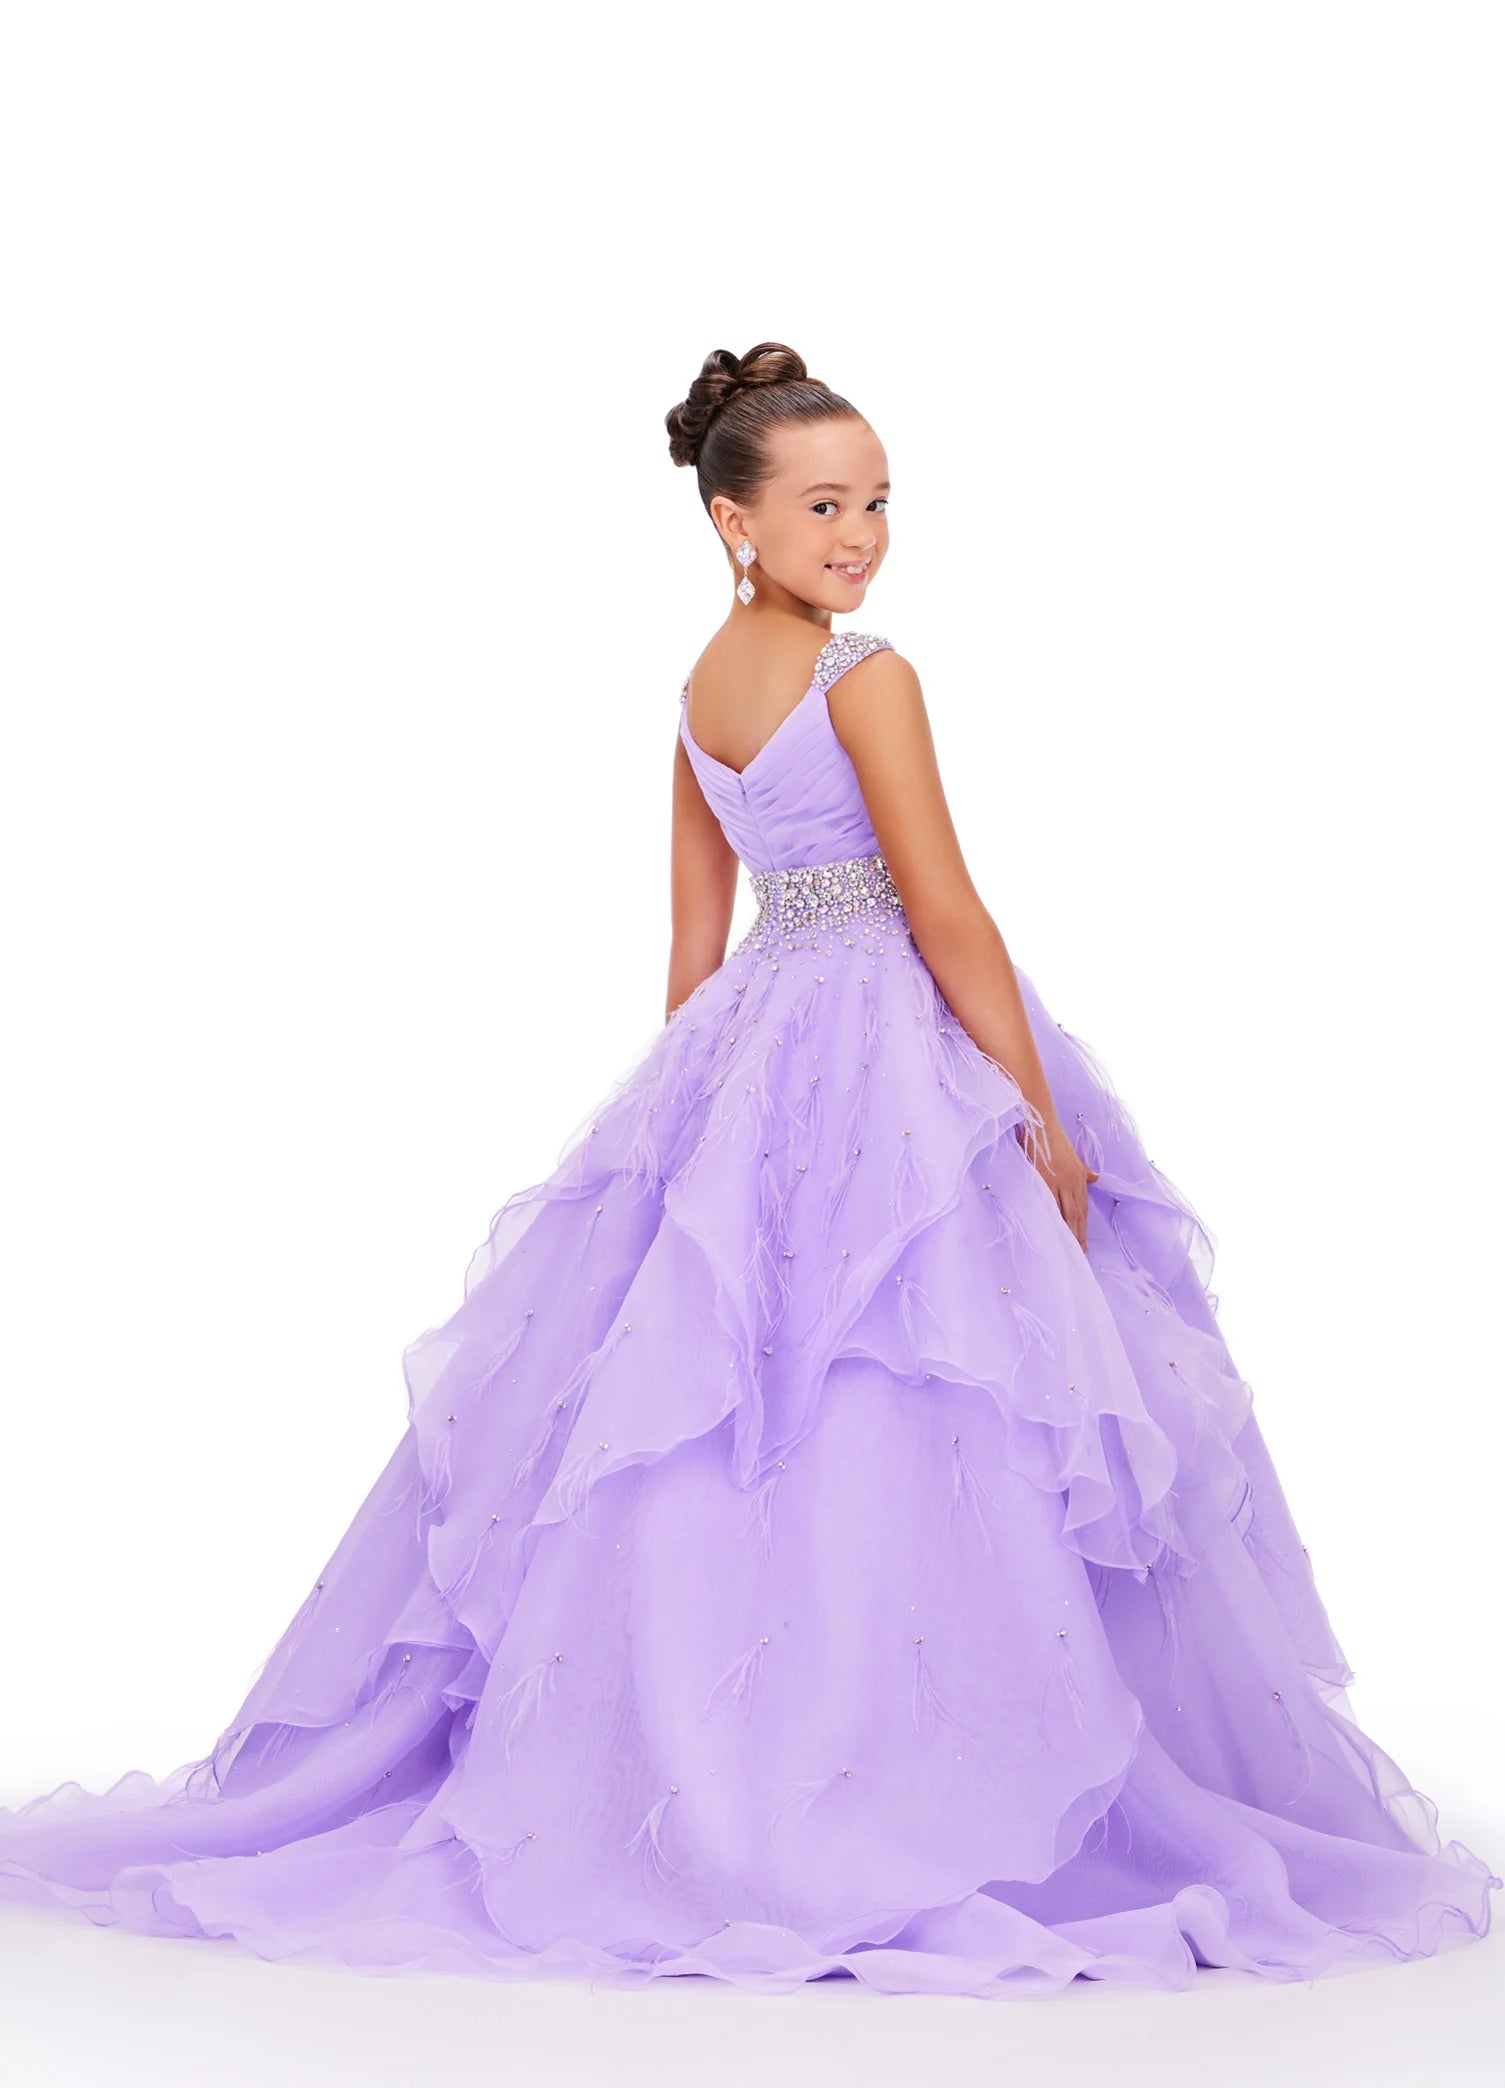 Elevate your little one's pageant look with the Ashley Lauren Kids 8219 Girls Layered Feather Pageant Dress. This stunning ballgown features a V-neck embellished with feathers, adding a touch of glamour to the overall design. With its layered skirt, this dress will make your child feel like a princess on stage. Be the star of the show in this fabulous organza ball gown